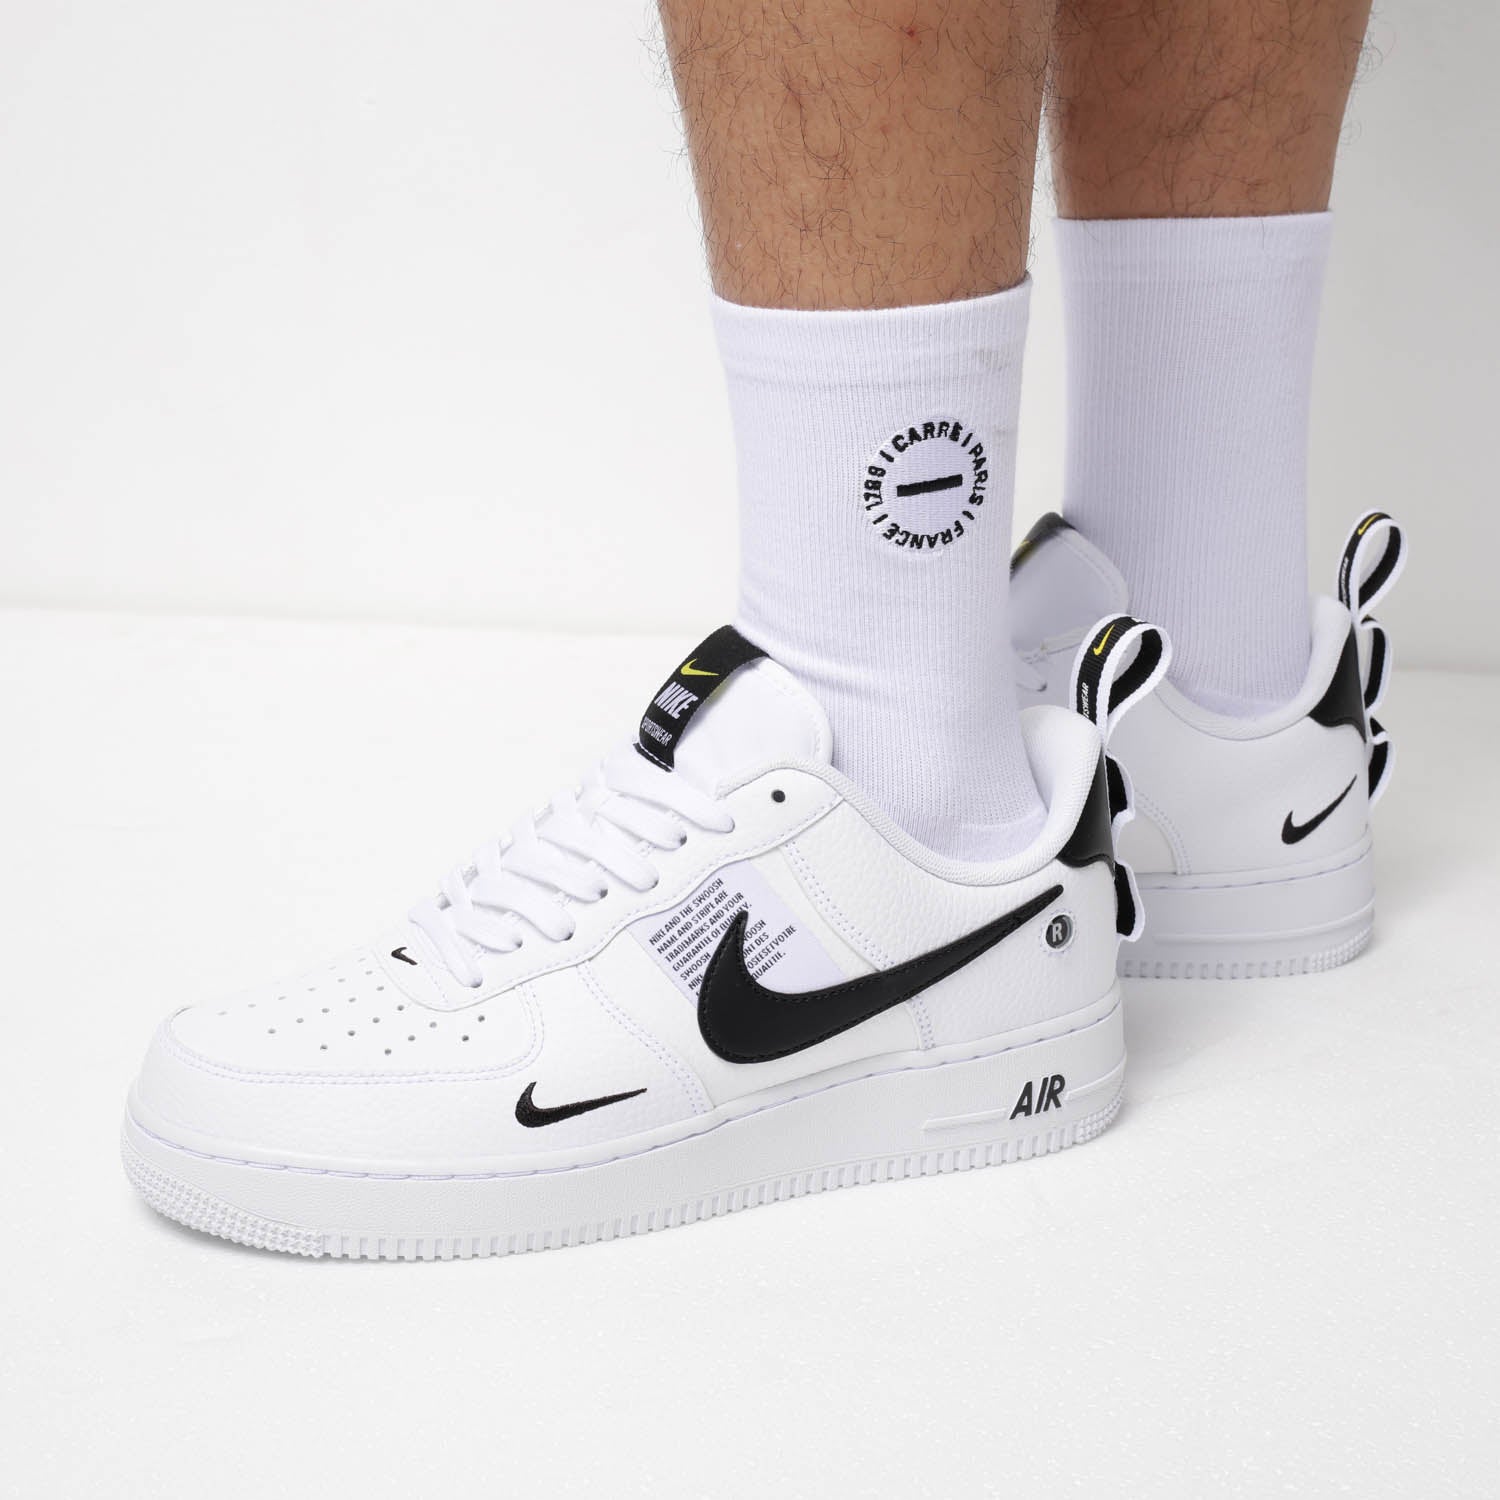 nike air force 1 overbranded women's